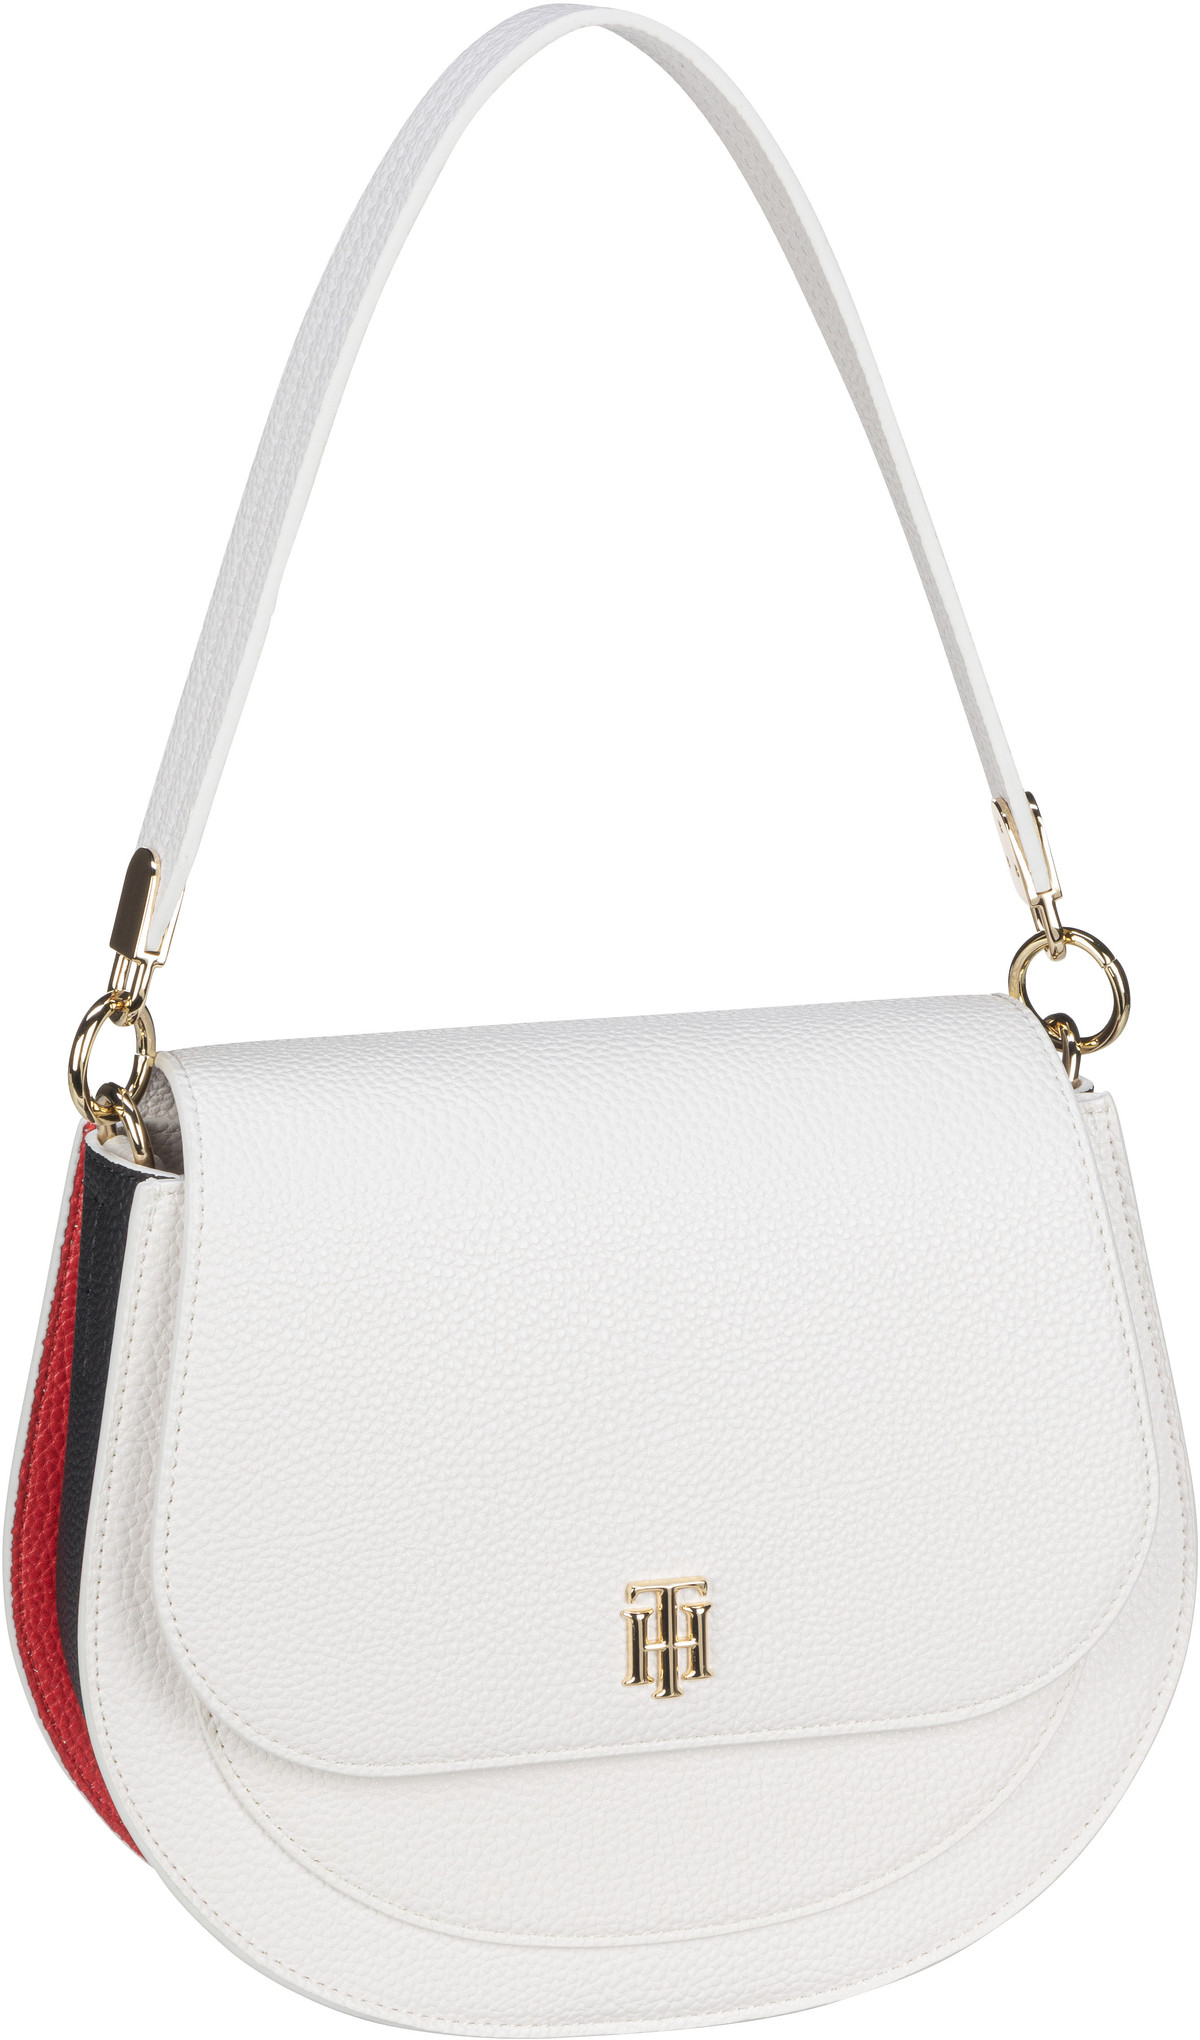 Tommy Hilfiger TH Element Saddle Bag Corp SP22 - White Corporate